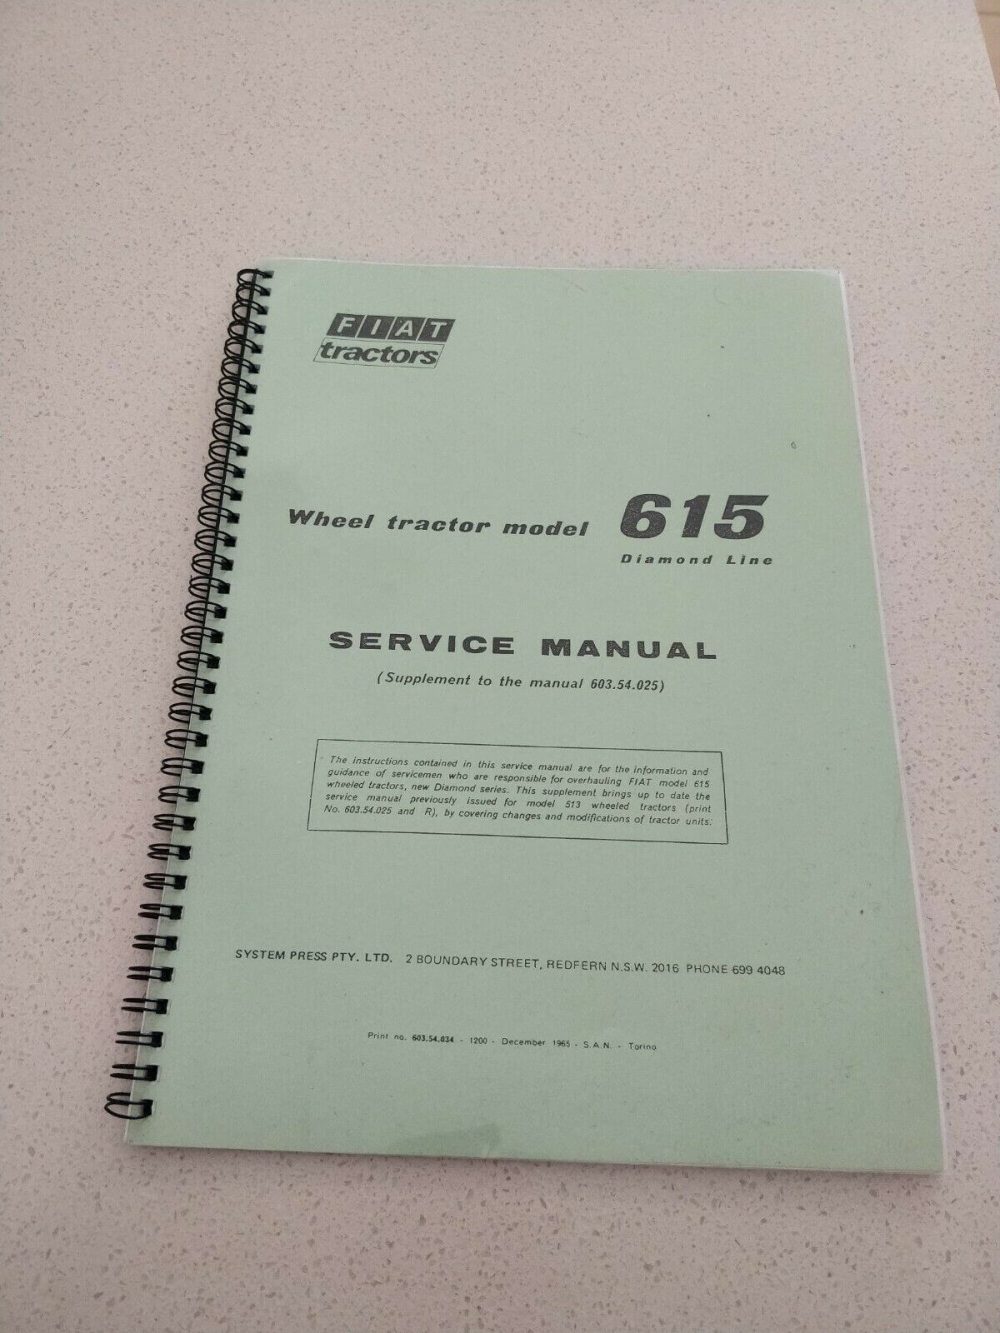 FIAT 615 wheel tractor model service manual diamond line. Supplement to the manual 603.54.025